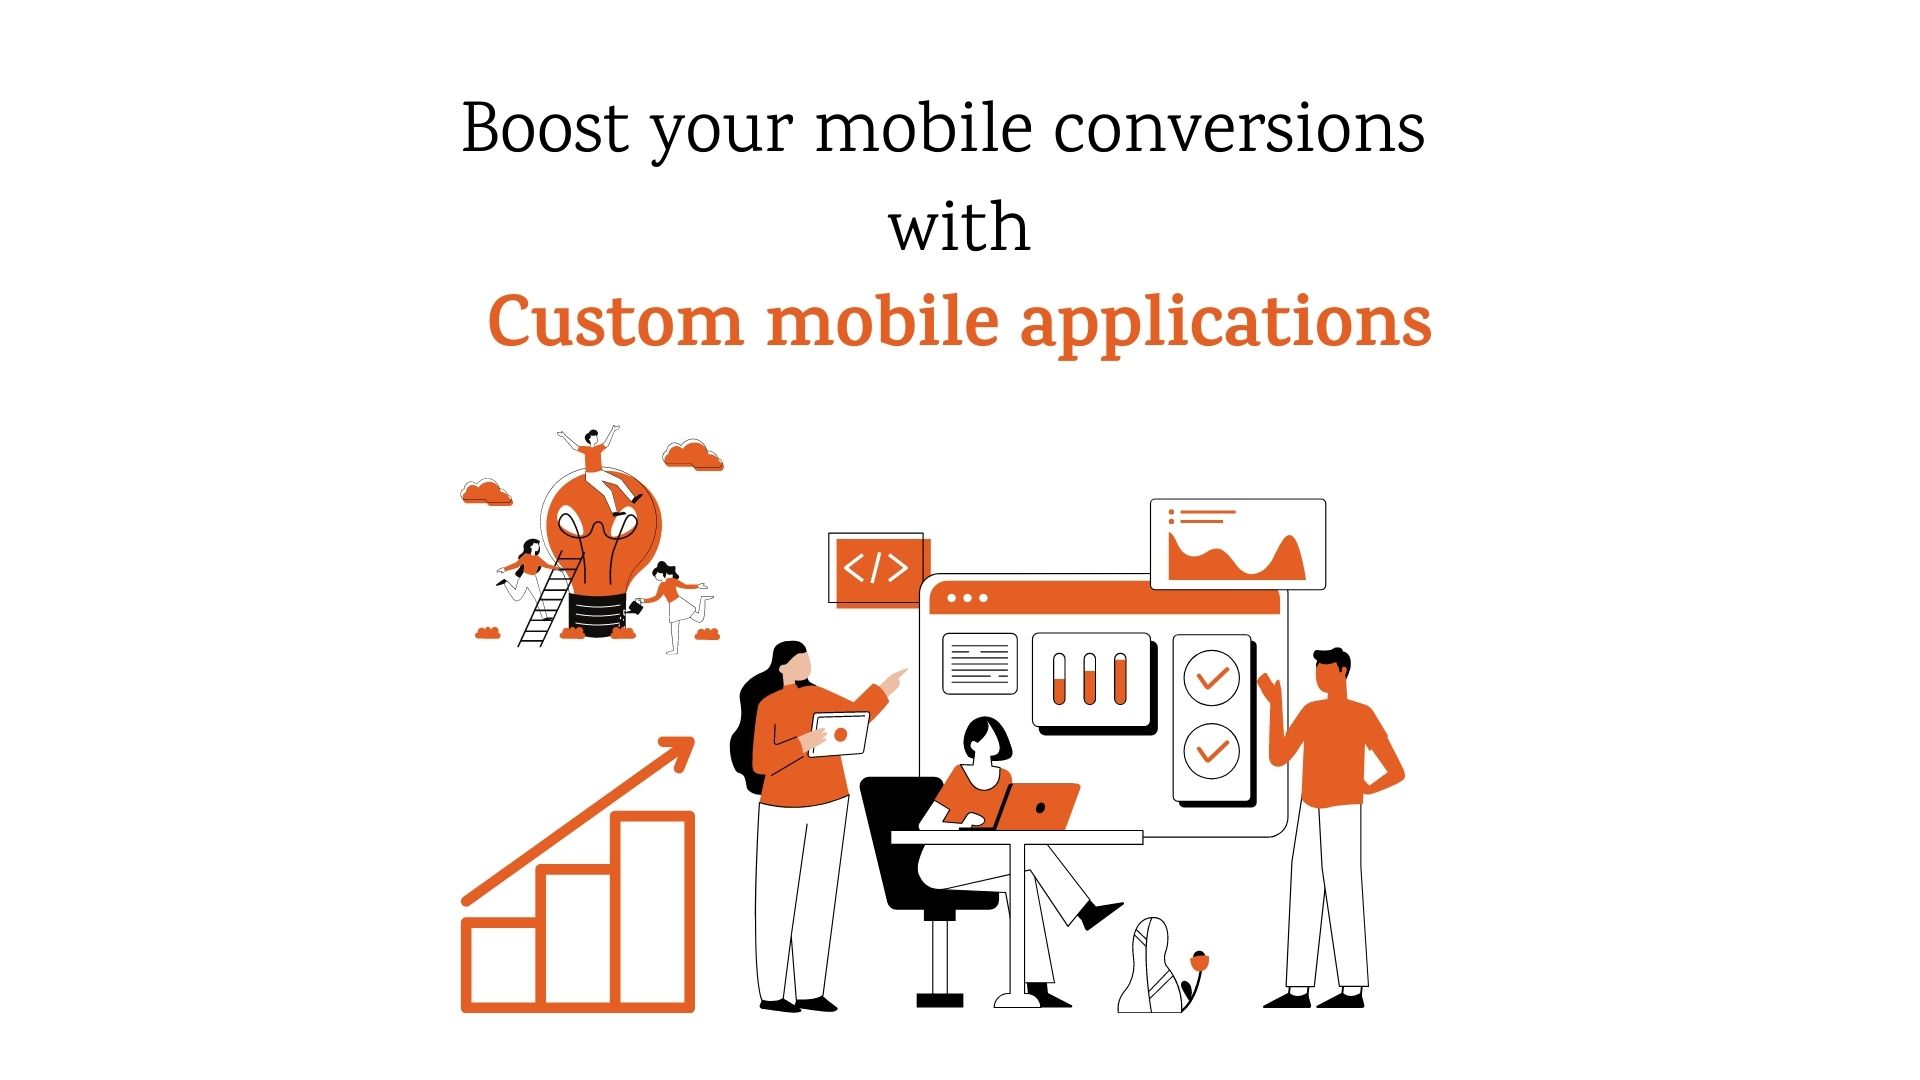 Boost your mobile conversions with Custom mobile applications